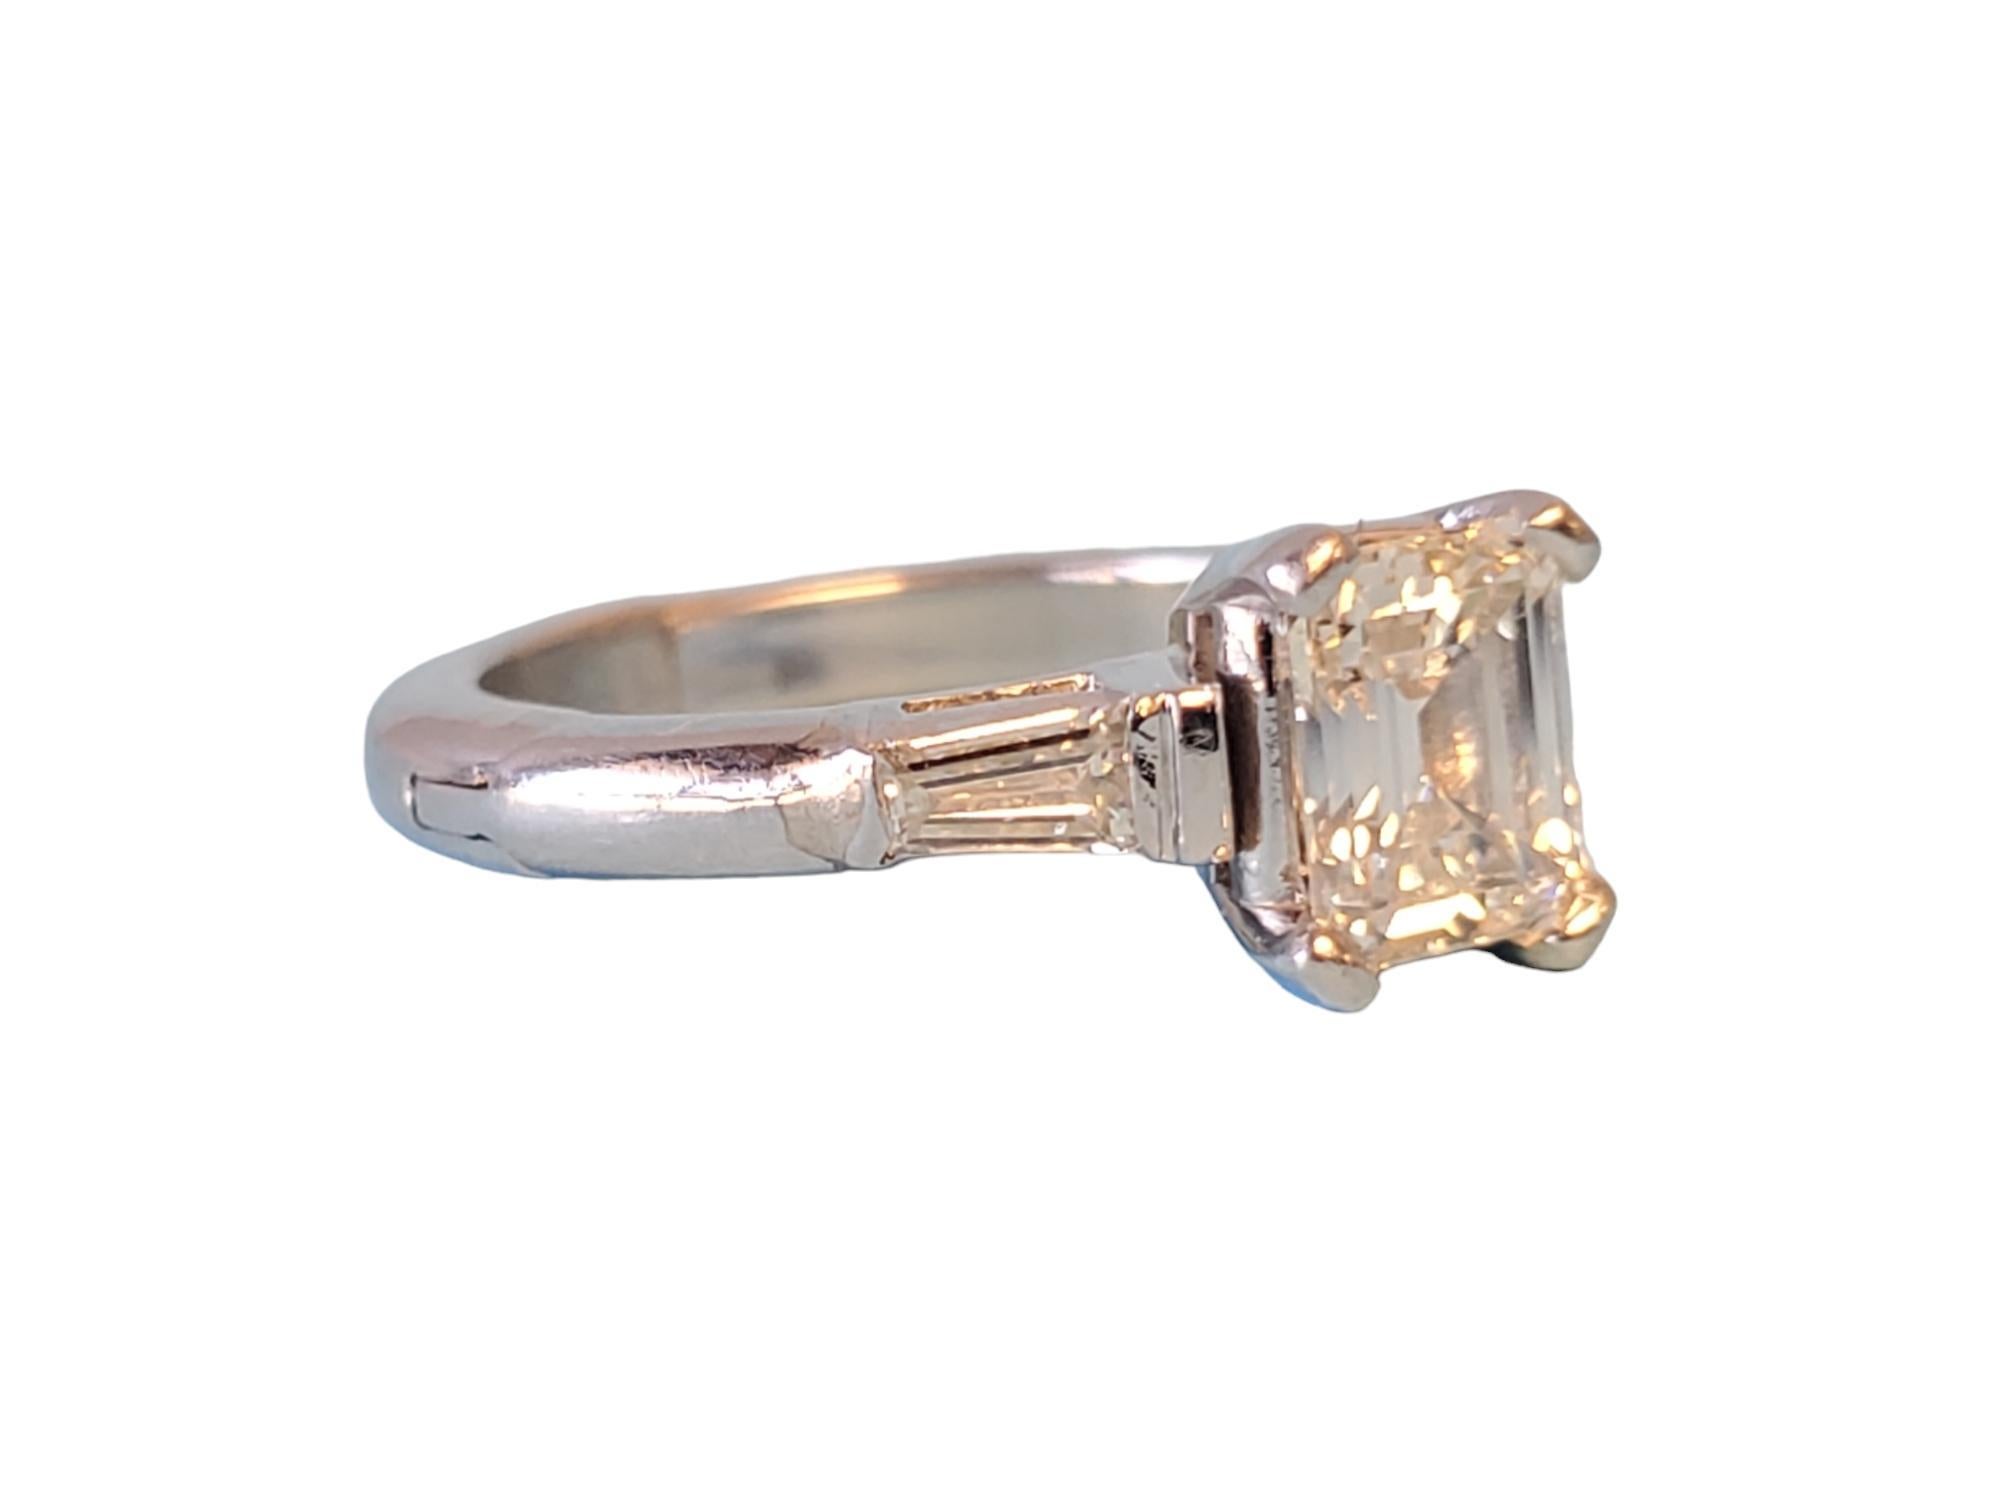 Platinum 1.20tcw Engagement Ring Tapered Baguettes

Listed is a platinum emerald cut engagement ring with tapered baguettes in an adjustable shank. The center stone is a natural diamond 1.00-1.02ct by measurement featuring H-I color and VS2-SI1